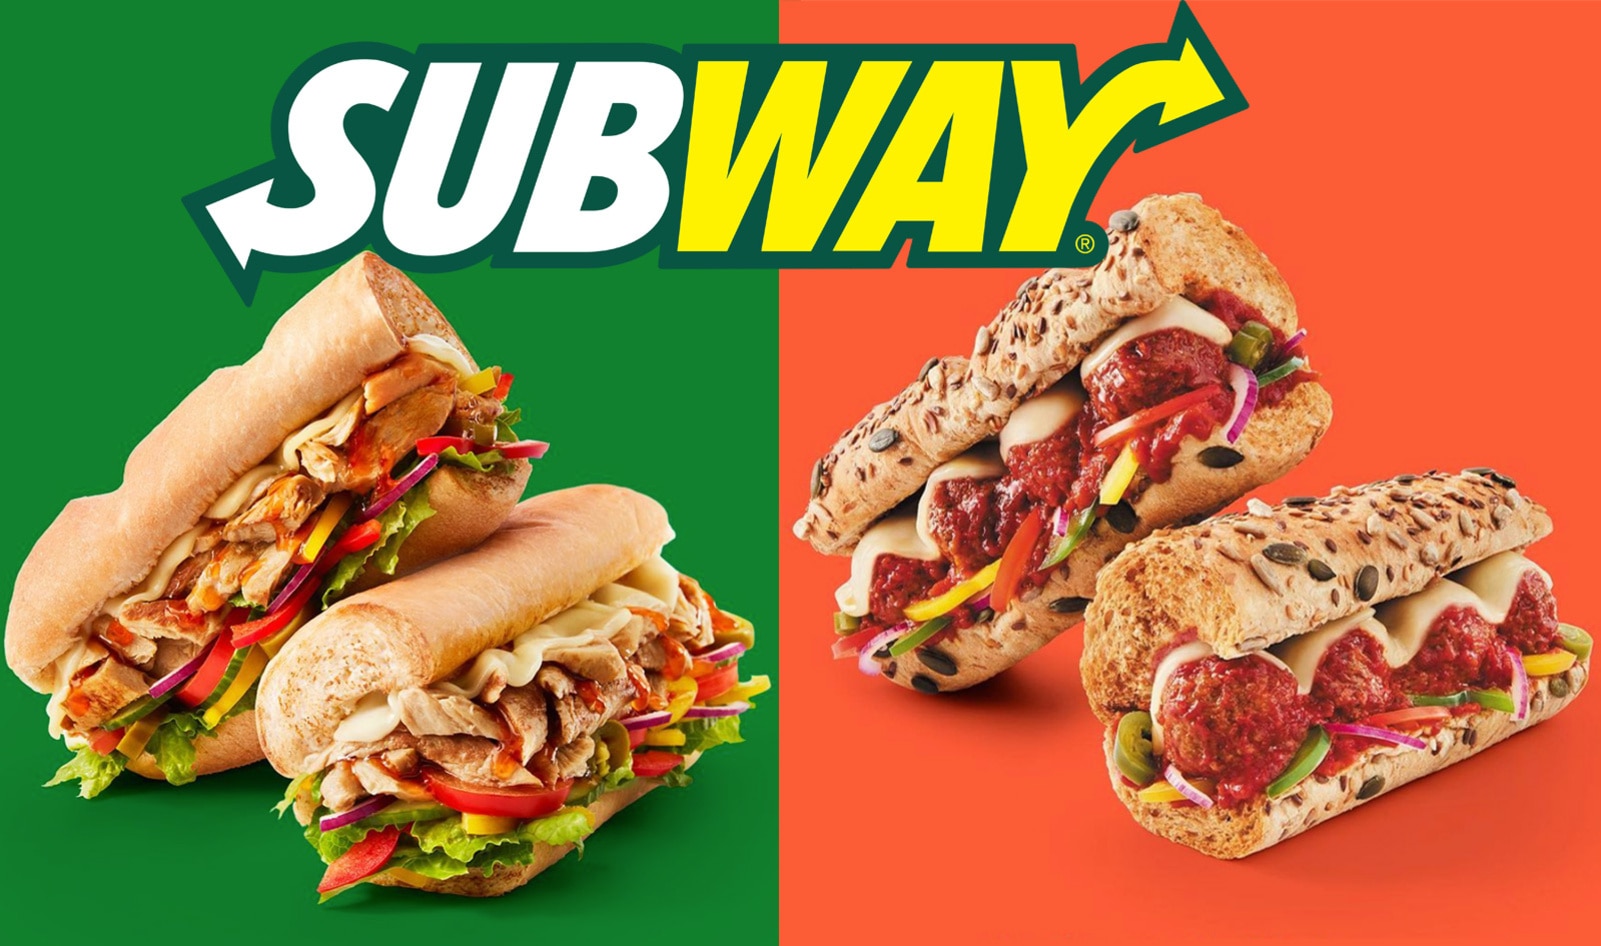 Subway Releases World’s First “Plant-Based” Song to Promote Its Vegan Options